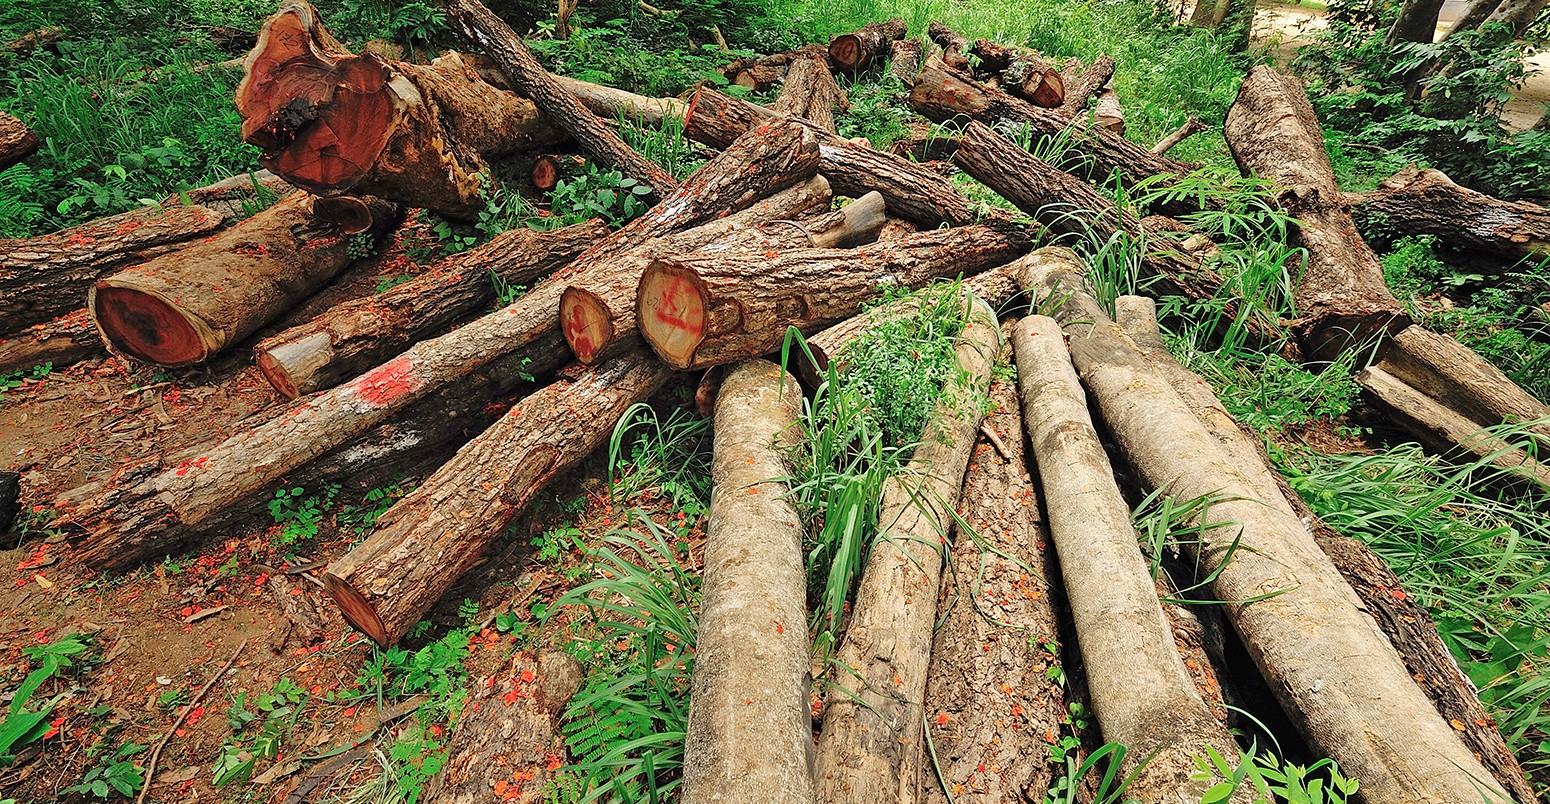 https://chippstree.com/wp-content/uploads/2019/01/The-Global-Deforestation-Crisis-FEATURE.jpg